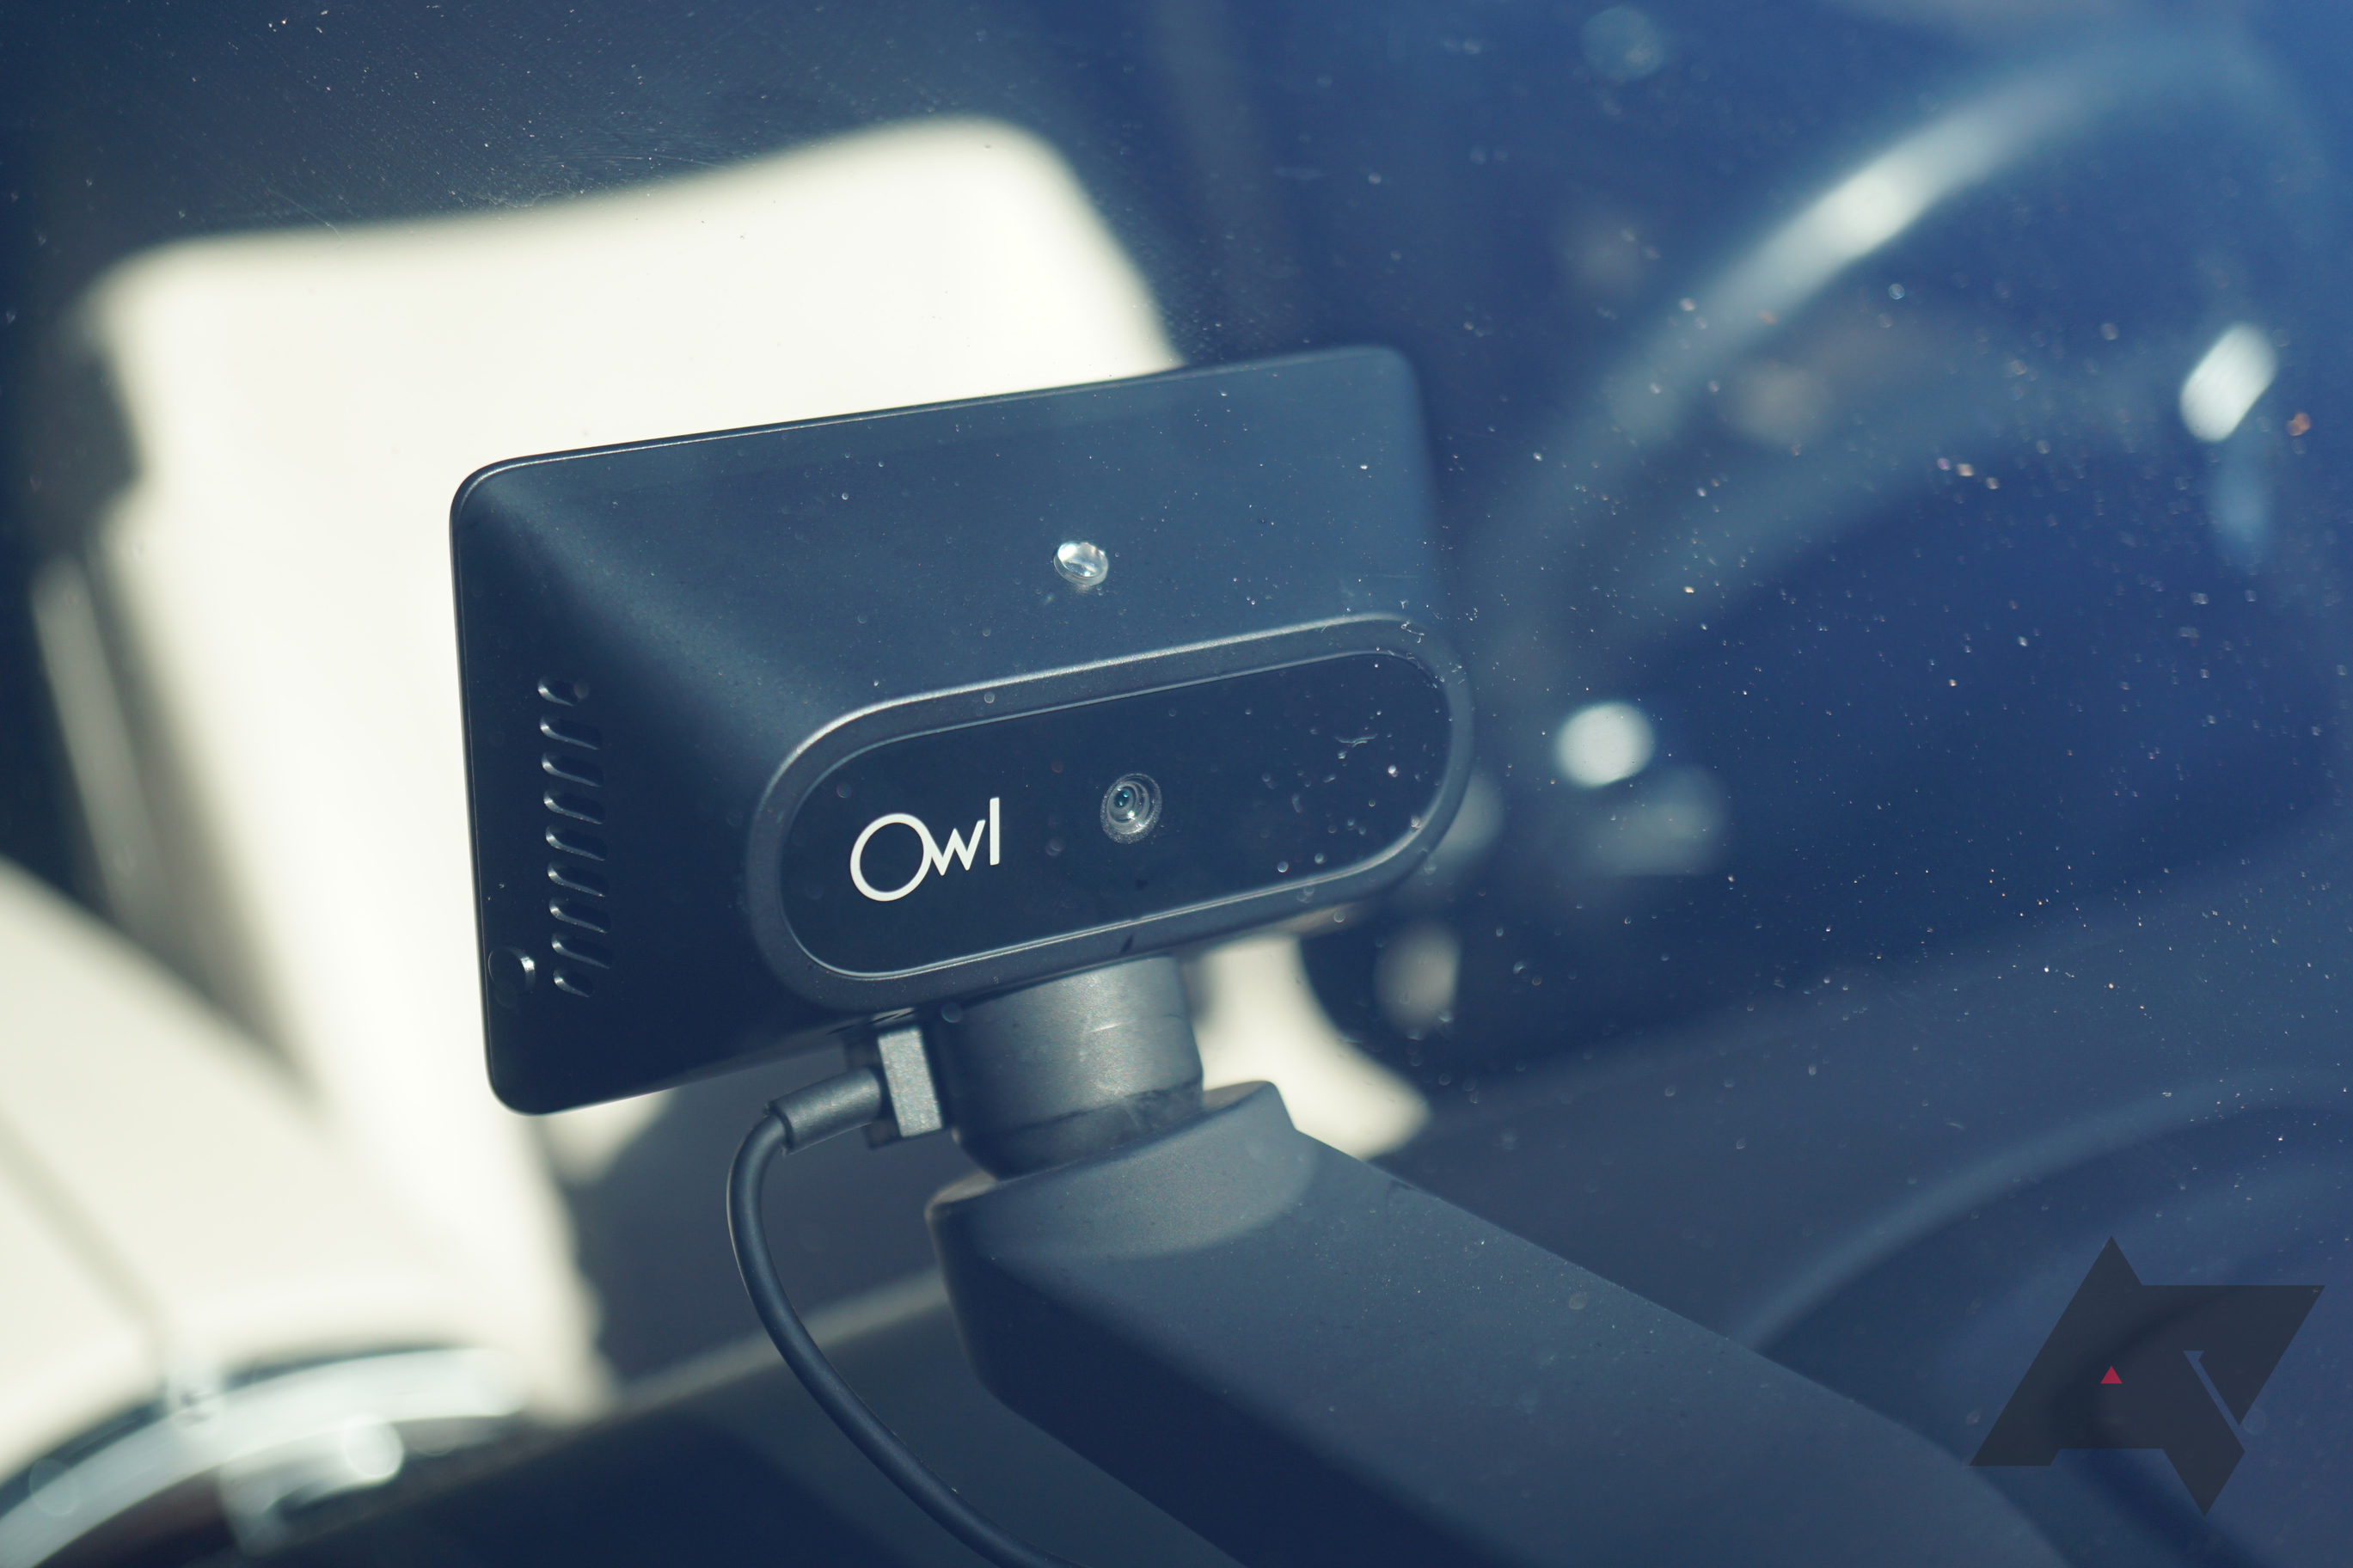 Dash cam with Internet: The Owl car camera can grab video of